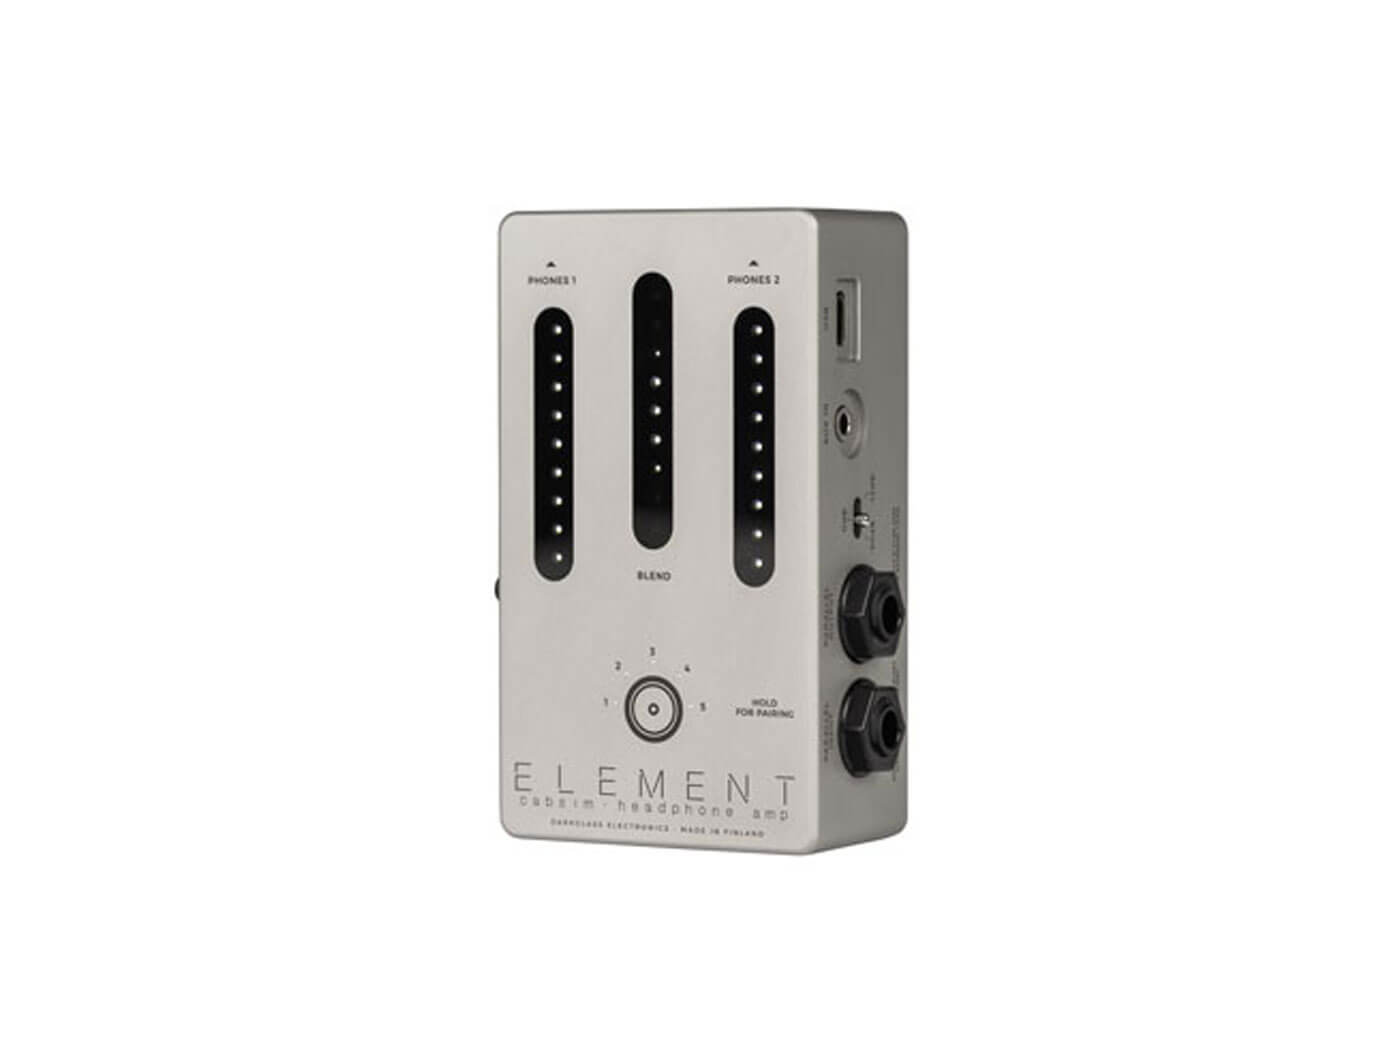 Darkglass unveils the Element pedal-sized headphone amp and cab 